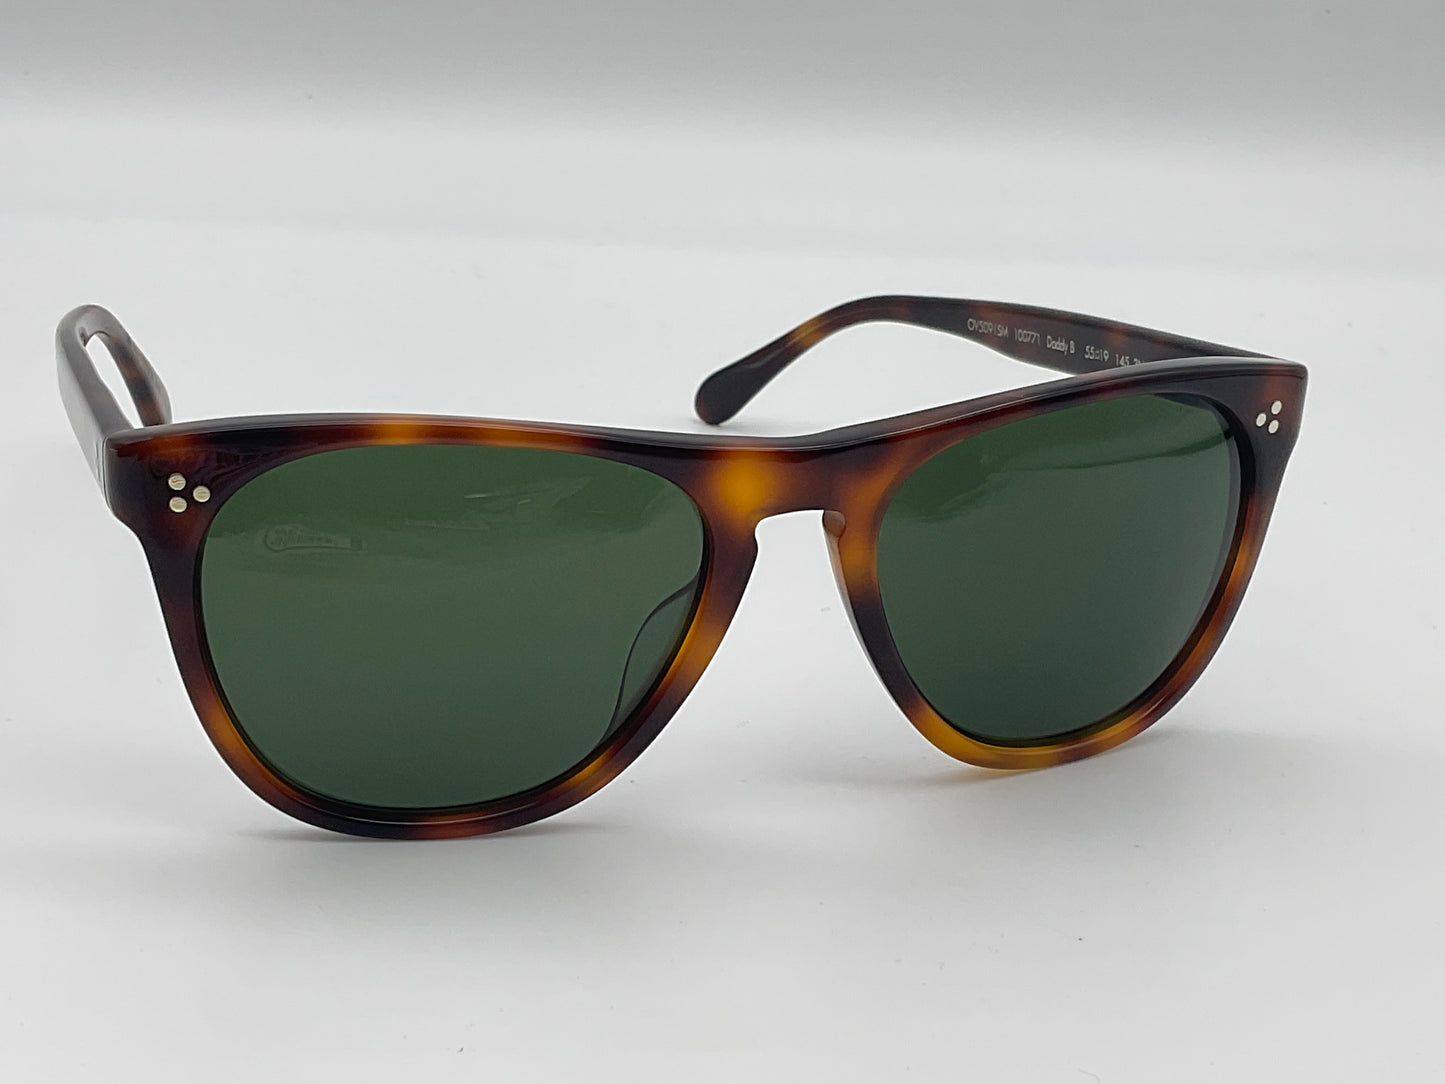 Oliver Peoples Daddy B. 55 mm tortoise made in Italy